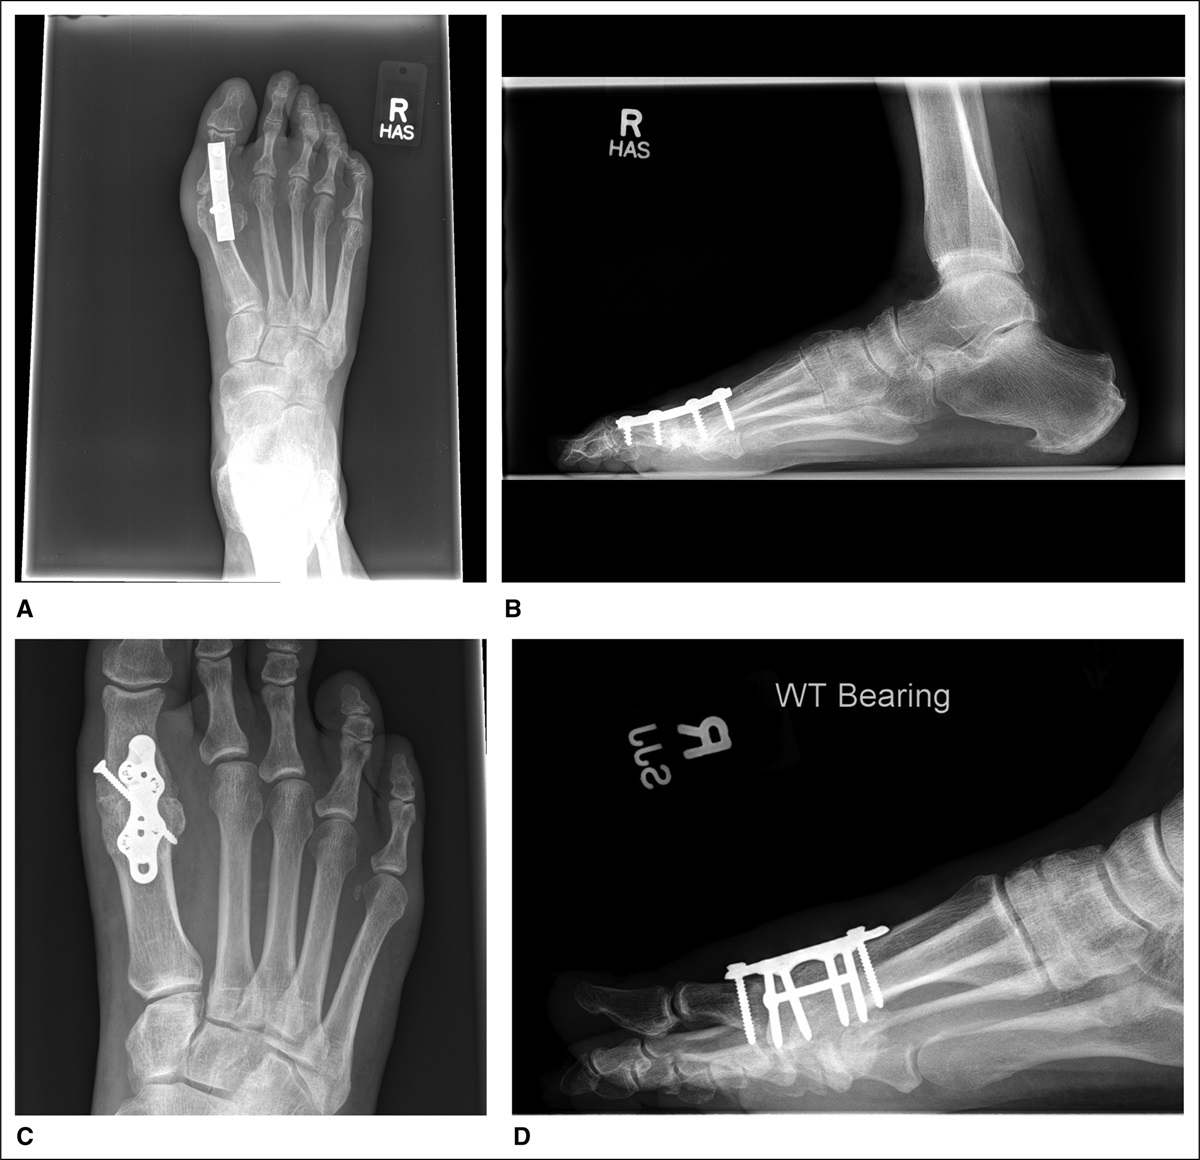 Analysis of the Costs and Complications of First Metatarsophalangeal Joint Arthrodesis Comparing Locked and Non-locked Plate Fixation Constructs